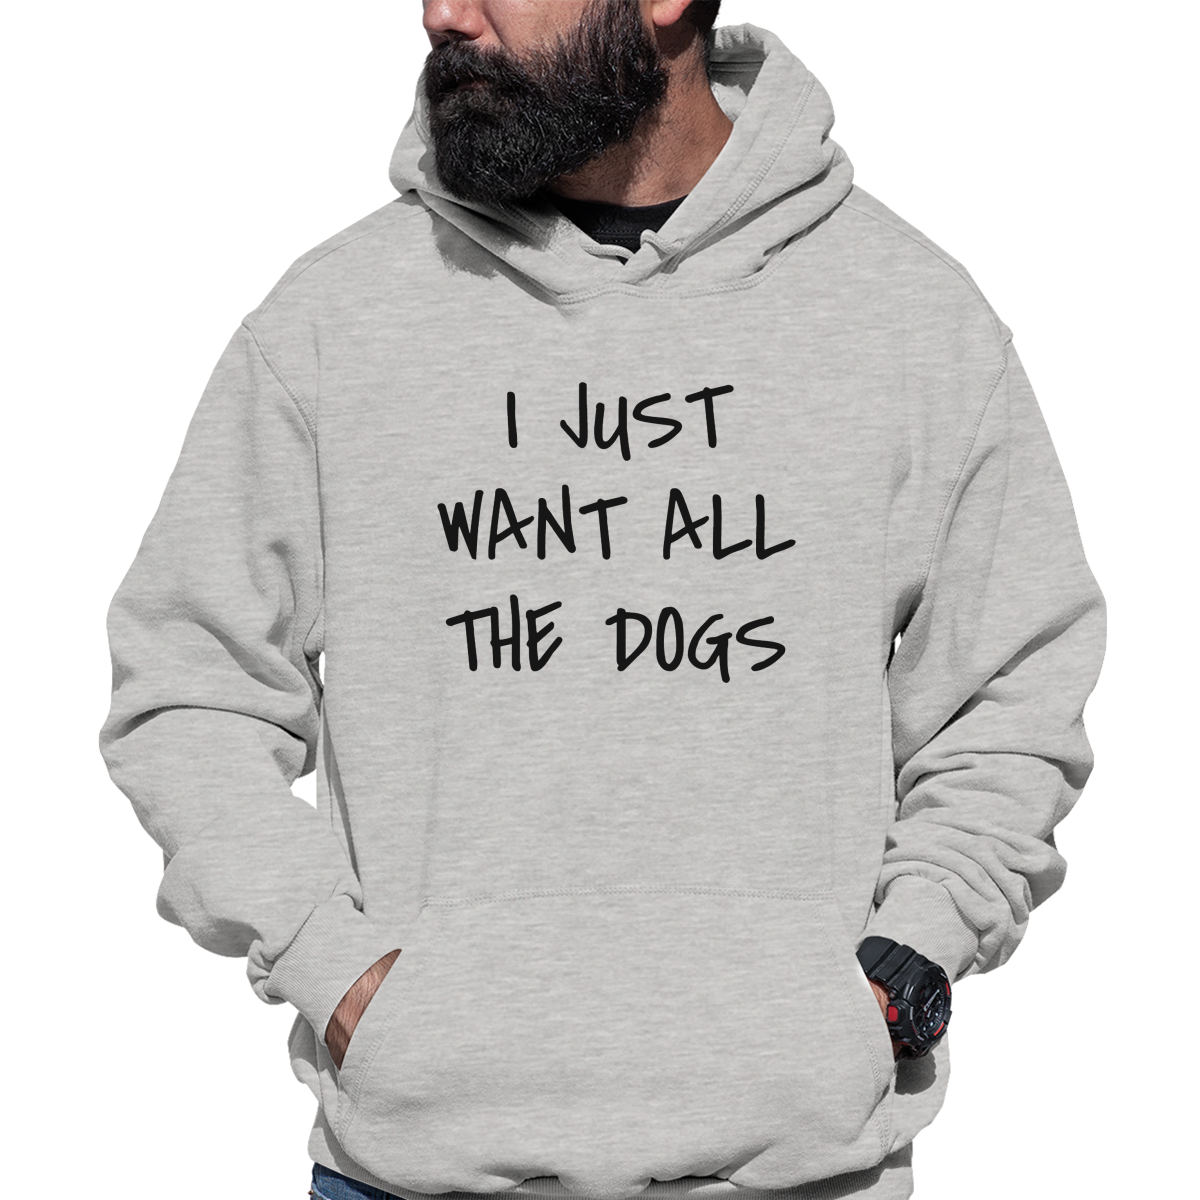 I Just Want All the Dogs Unisex Hoodie | Gray